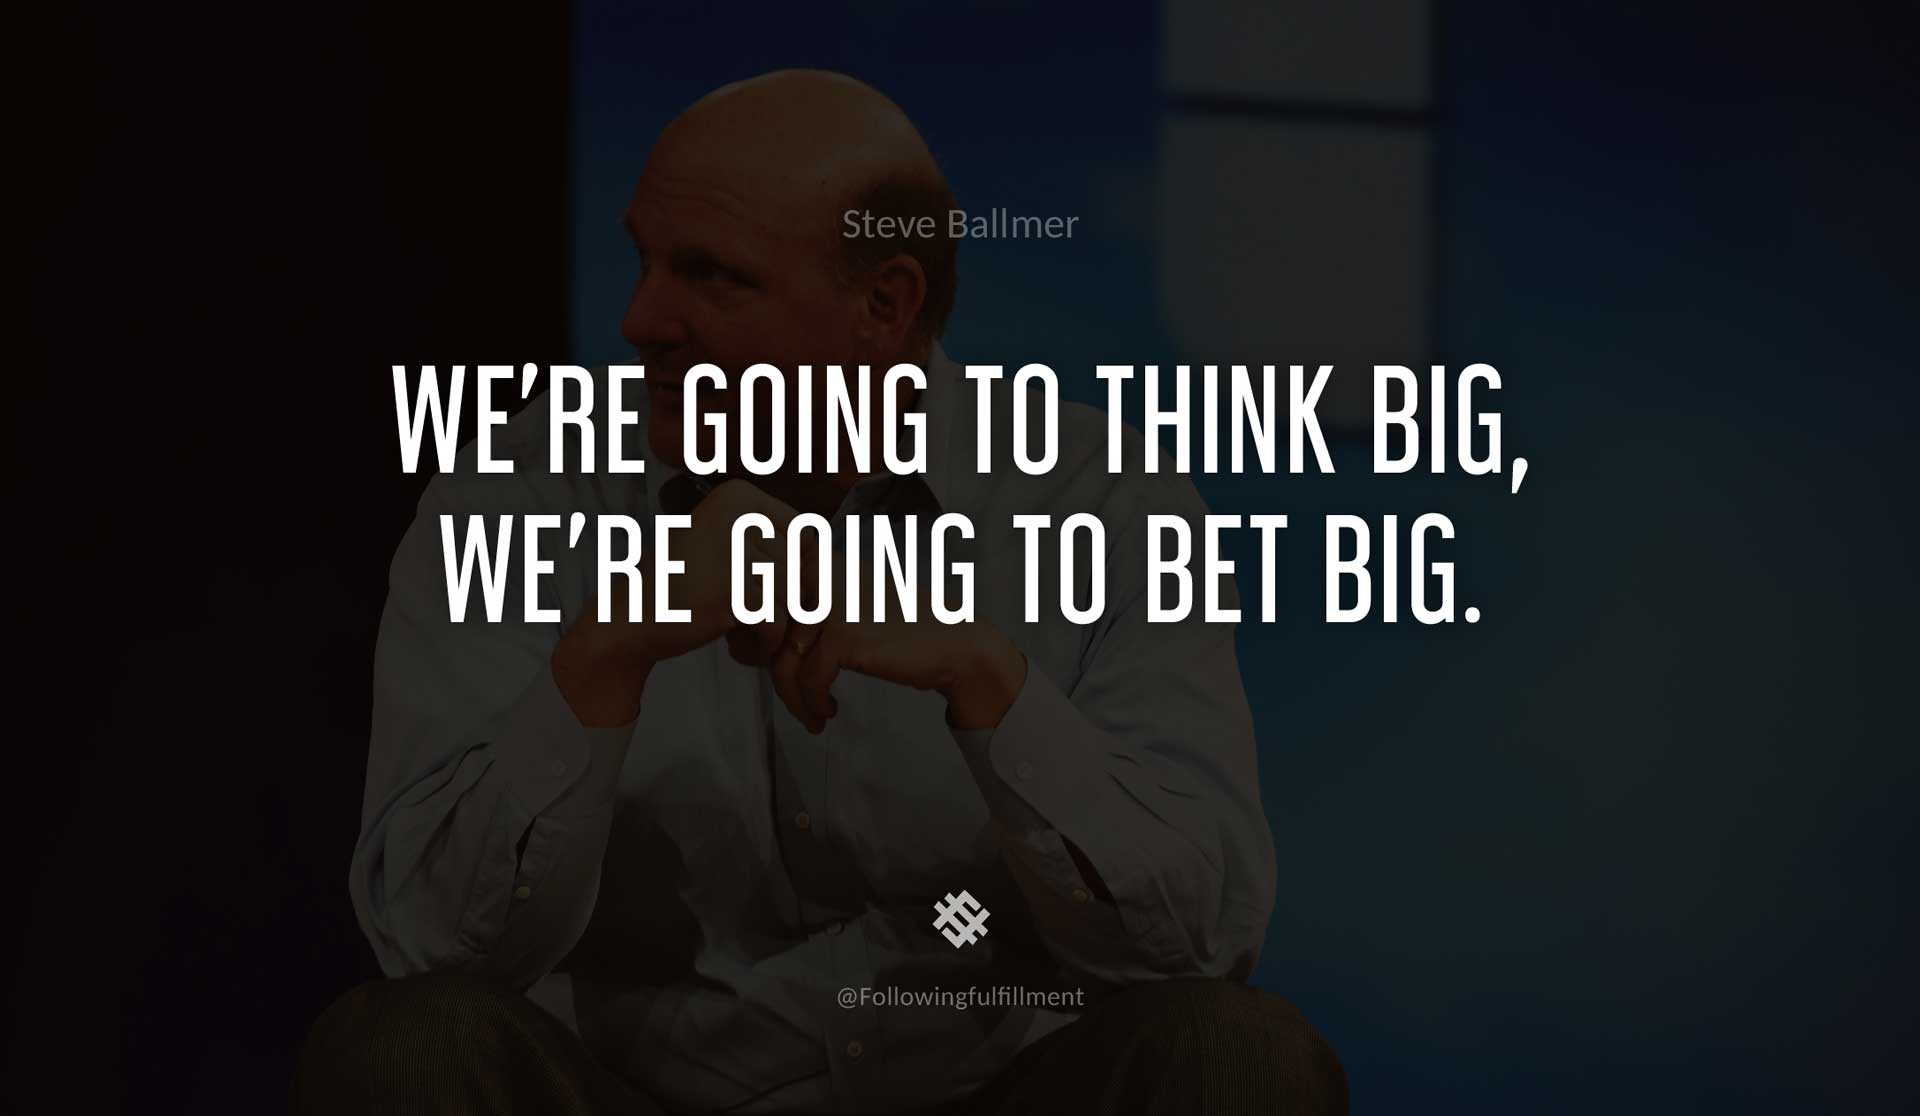 We're-going-to-think-big,-we're-going-to-bet-big.-STEVE-BALLMER-Quote.jpg